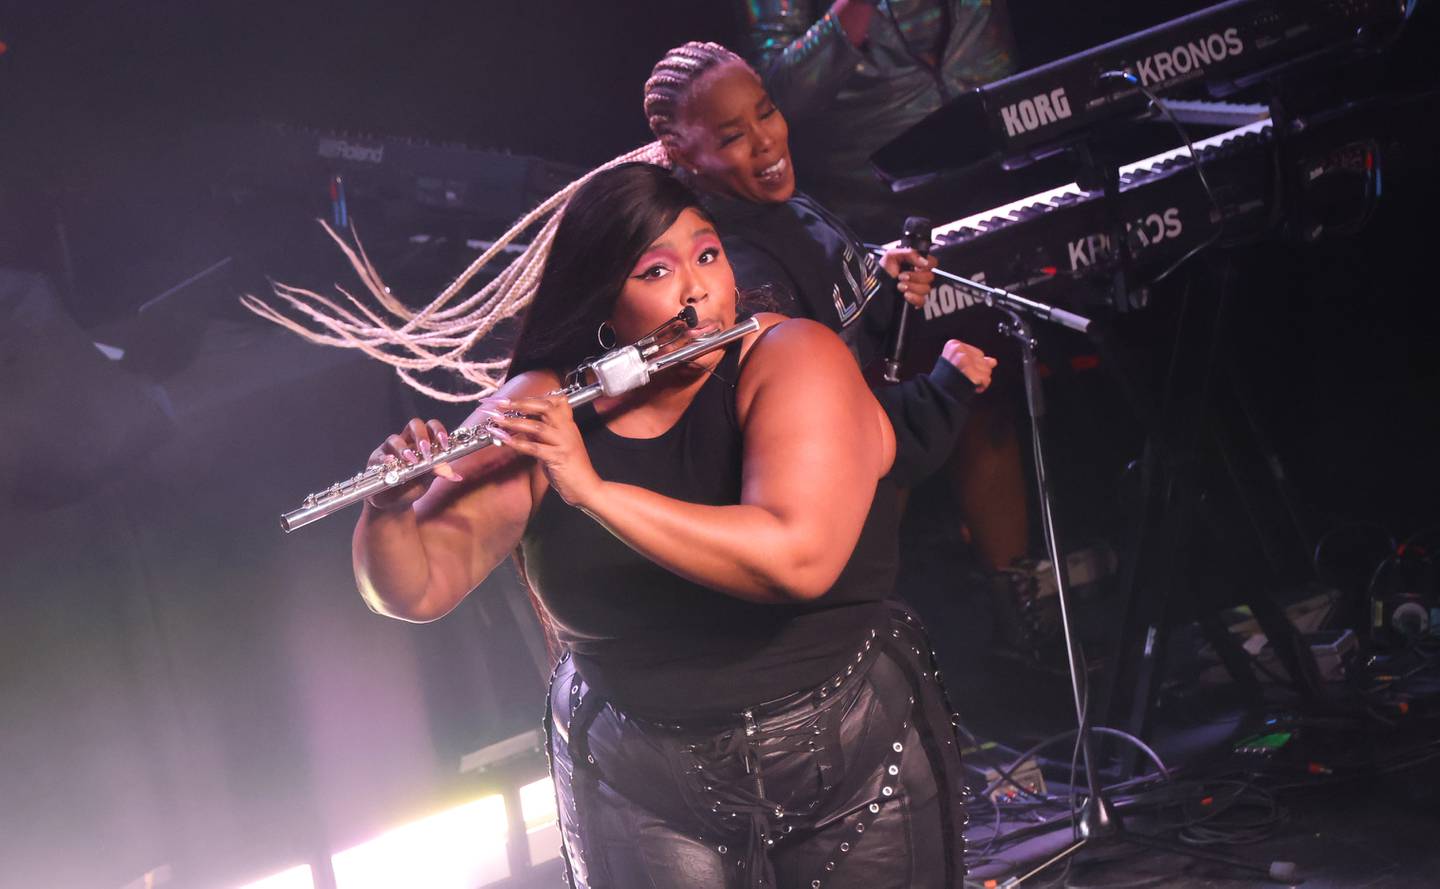 DETROIT, MICHIGAN - OCTOBER 05: Lizzo Performs Live At Saint Andrew's Hall For SiriusXM's Small Stage Series Presented By American Express on October 05, 2022 in Detroit, Michigan.